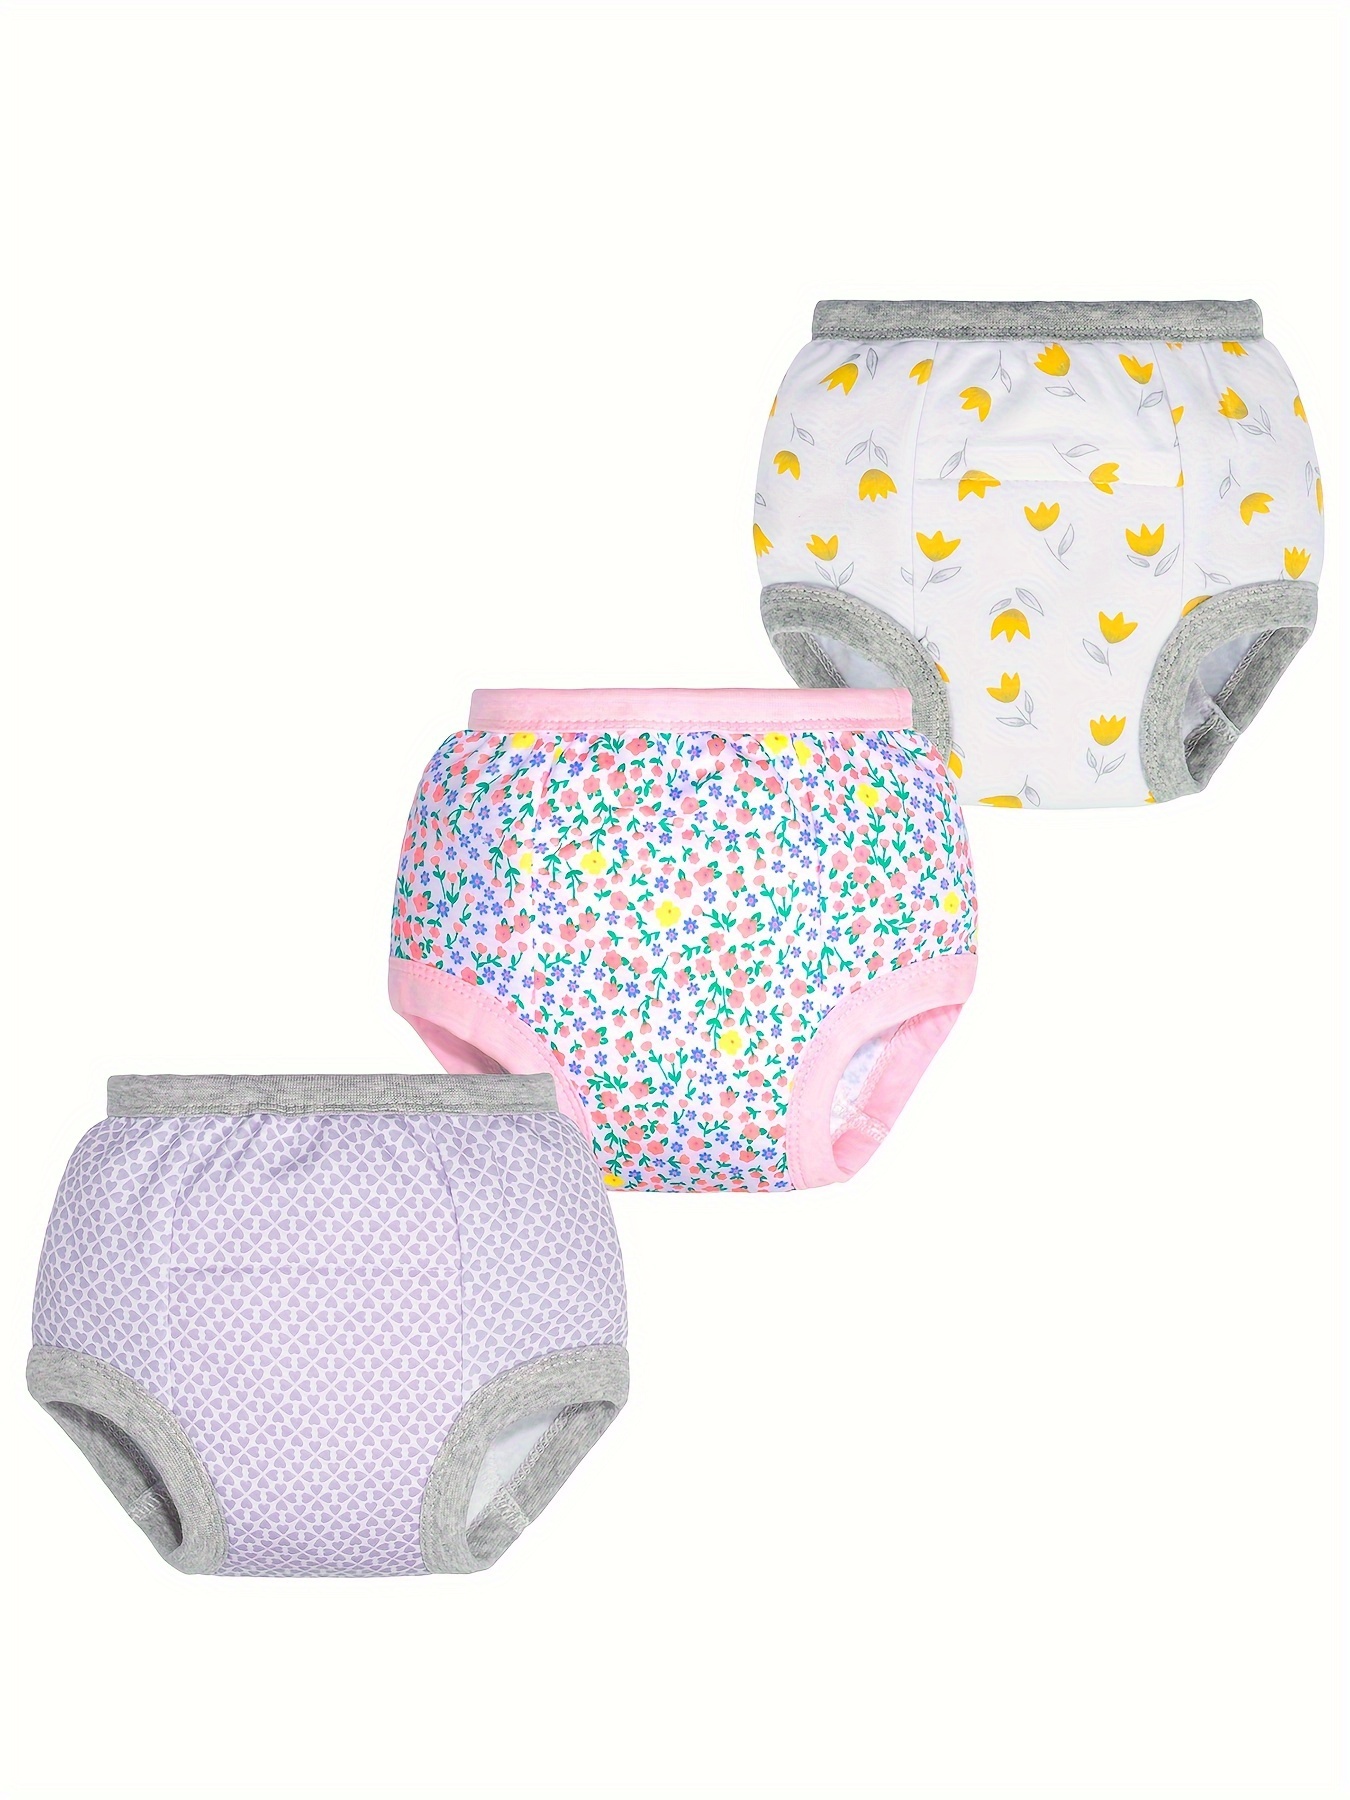 3pcs Baby Girls Training Underpants Toddler Training Pants 3 Pack, 12  Months-5T